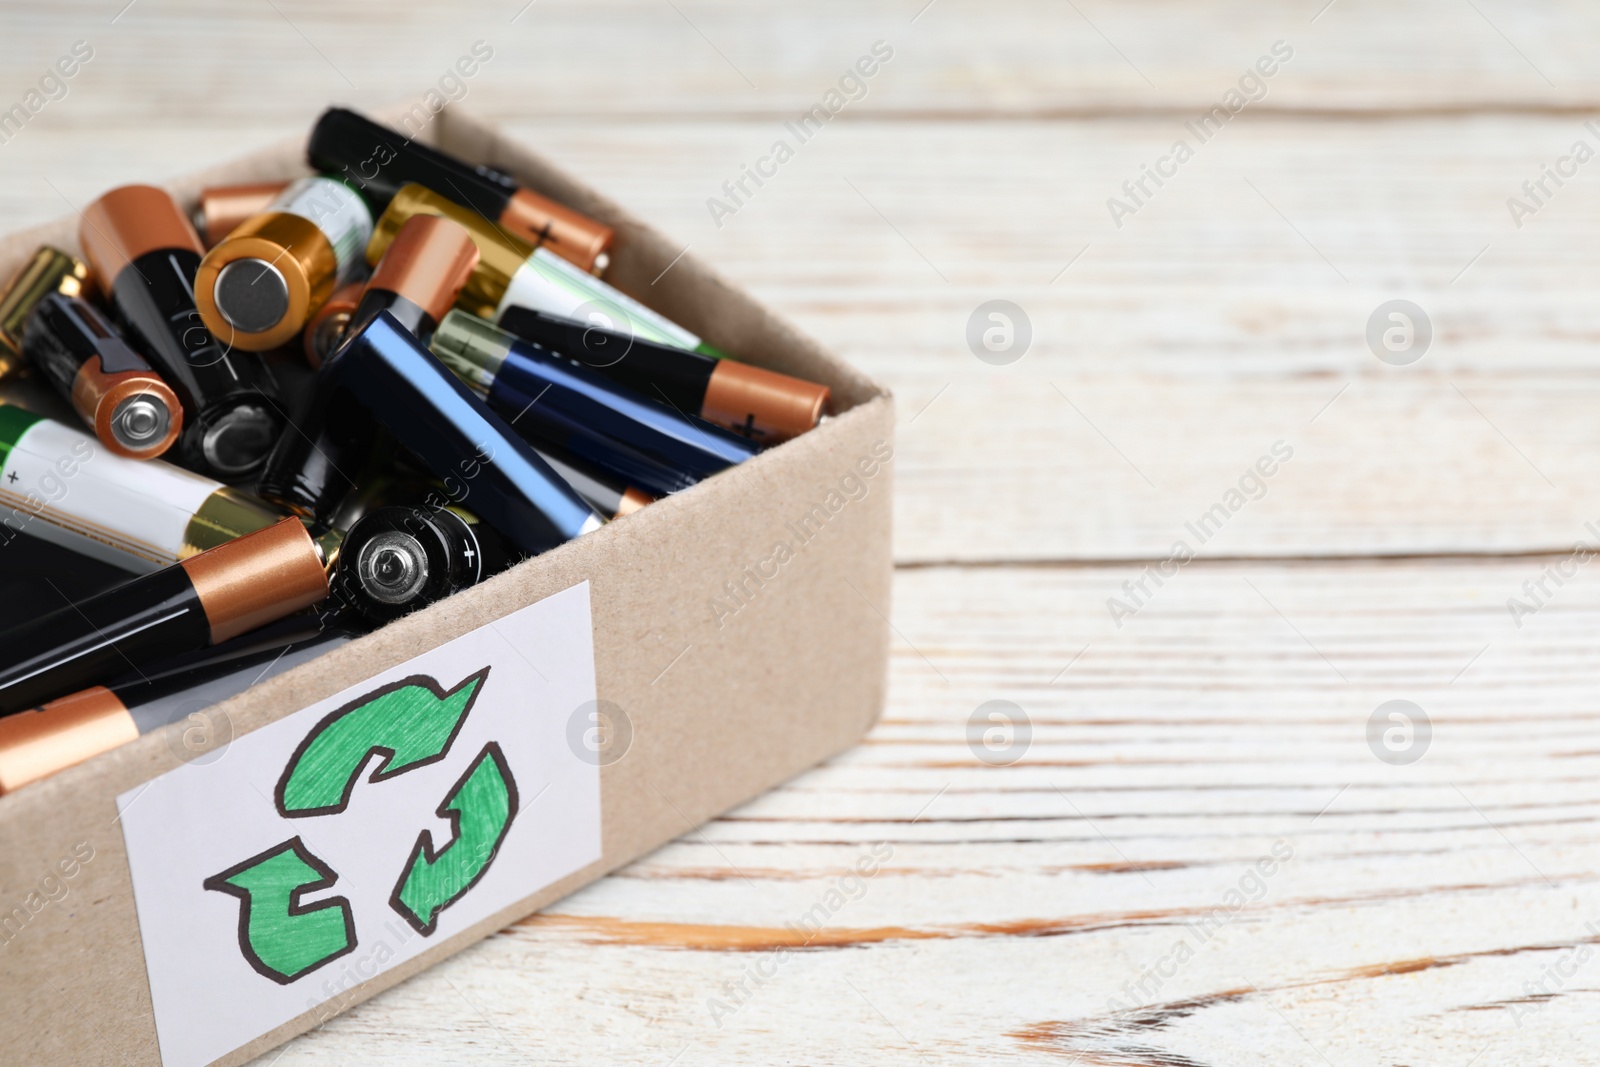 Image of Used batteries in cardboard box with recycling symbol on white wooden table, closeup. Space for text